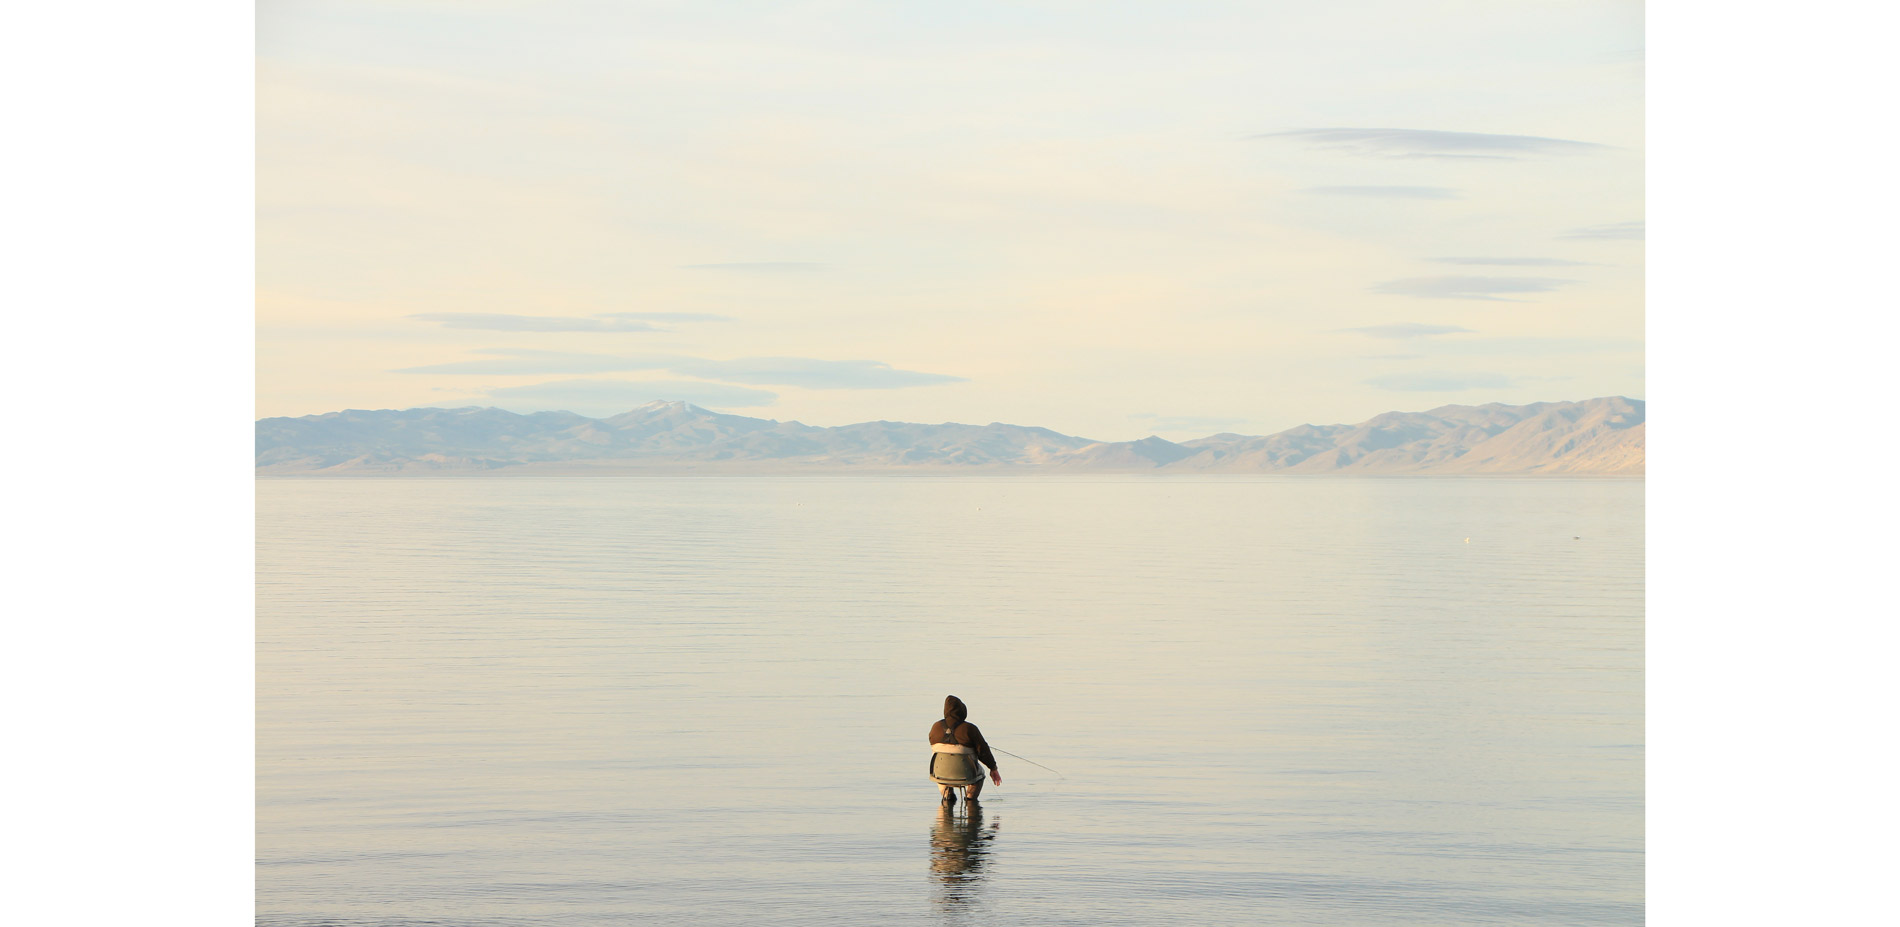 Pyramid Lake fades into the horizon at dusk, an expanse reminiscent of the ocean. Fisherman trying their luck at catching the prized Lahanton Cuthroat…